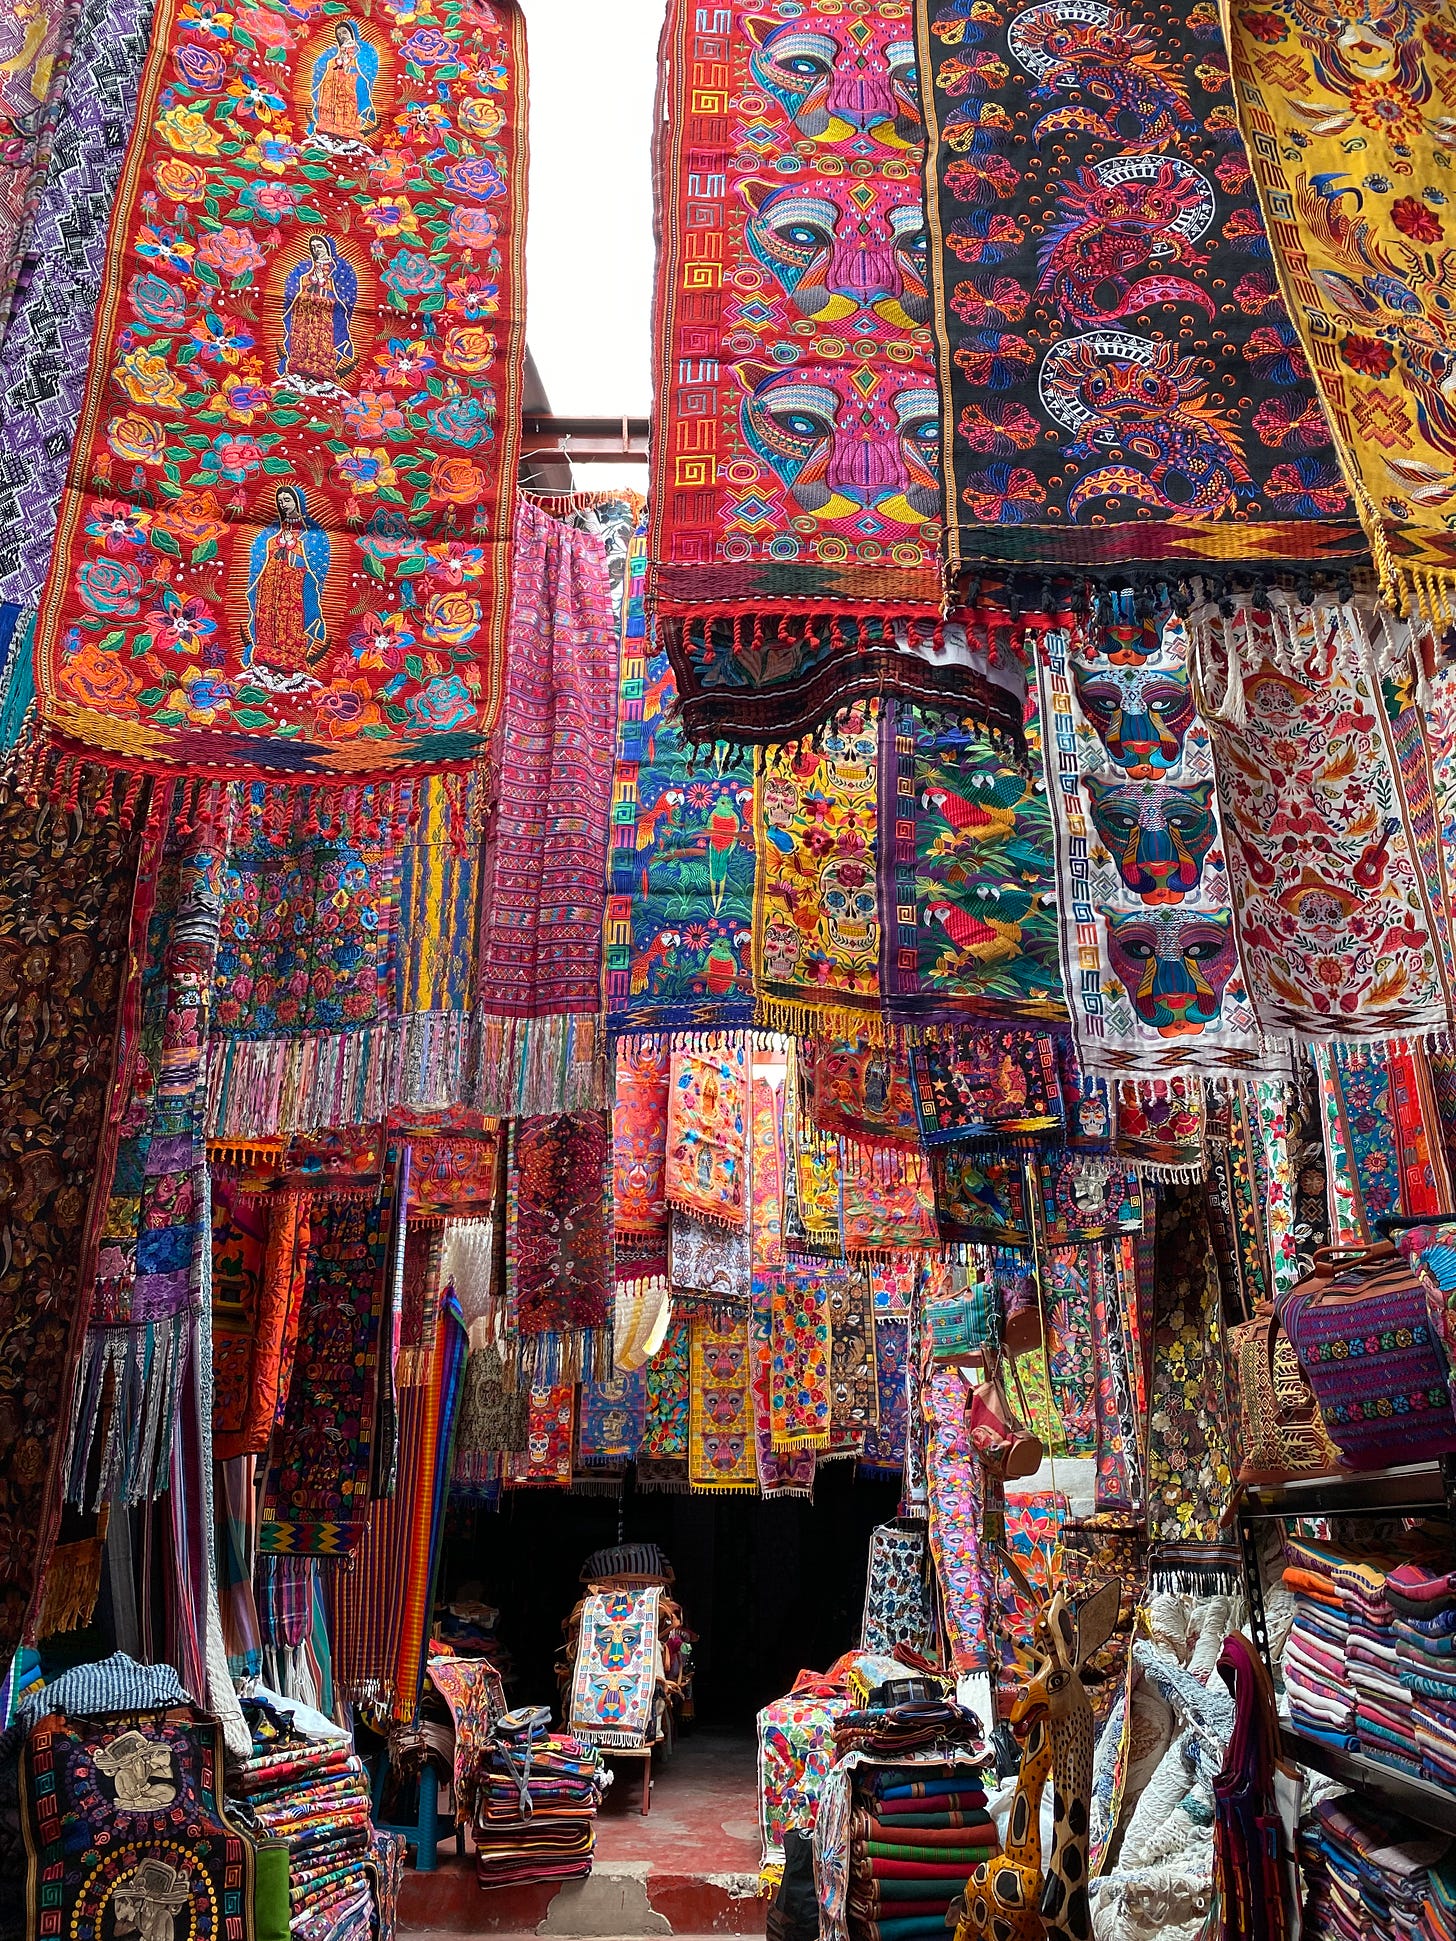 A store with a hanging display of bright, bold weavings and wall hangings.